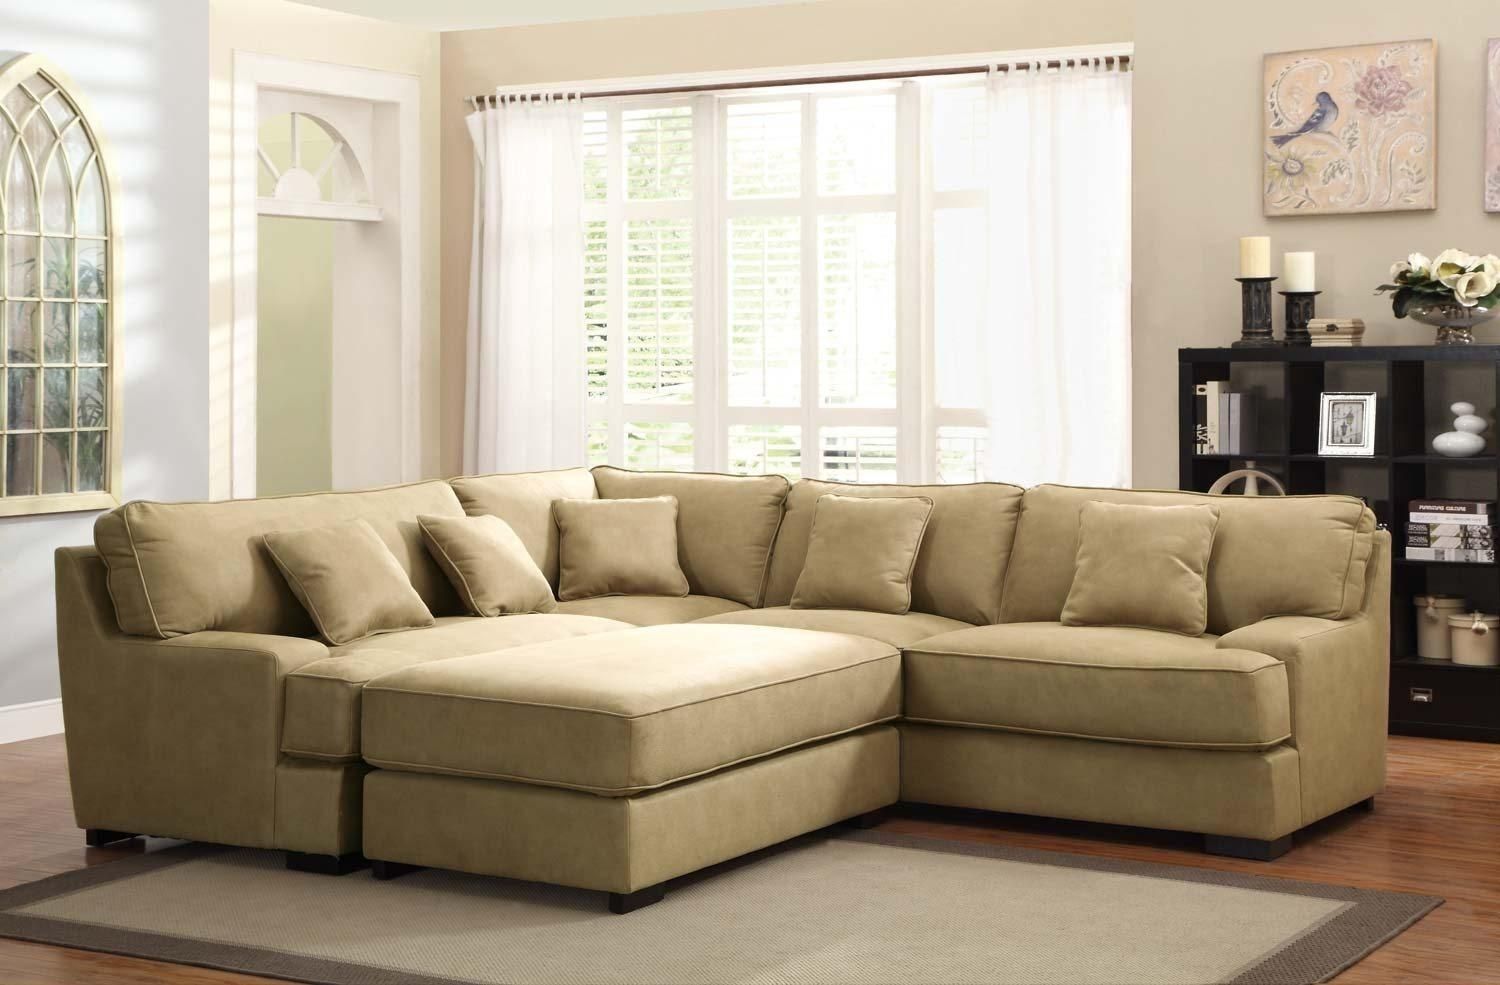 Sofas Center : Adorable Chocolate Leather Room To Go Sofas Creamy With Regard To Oversized Sectional (View 20 of 20)